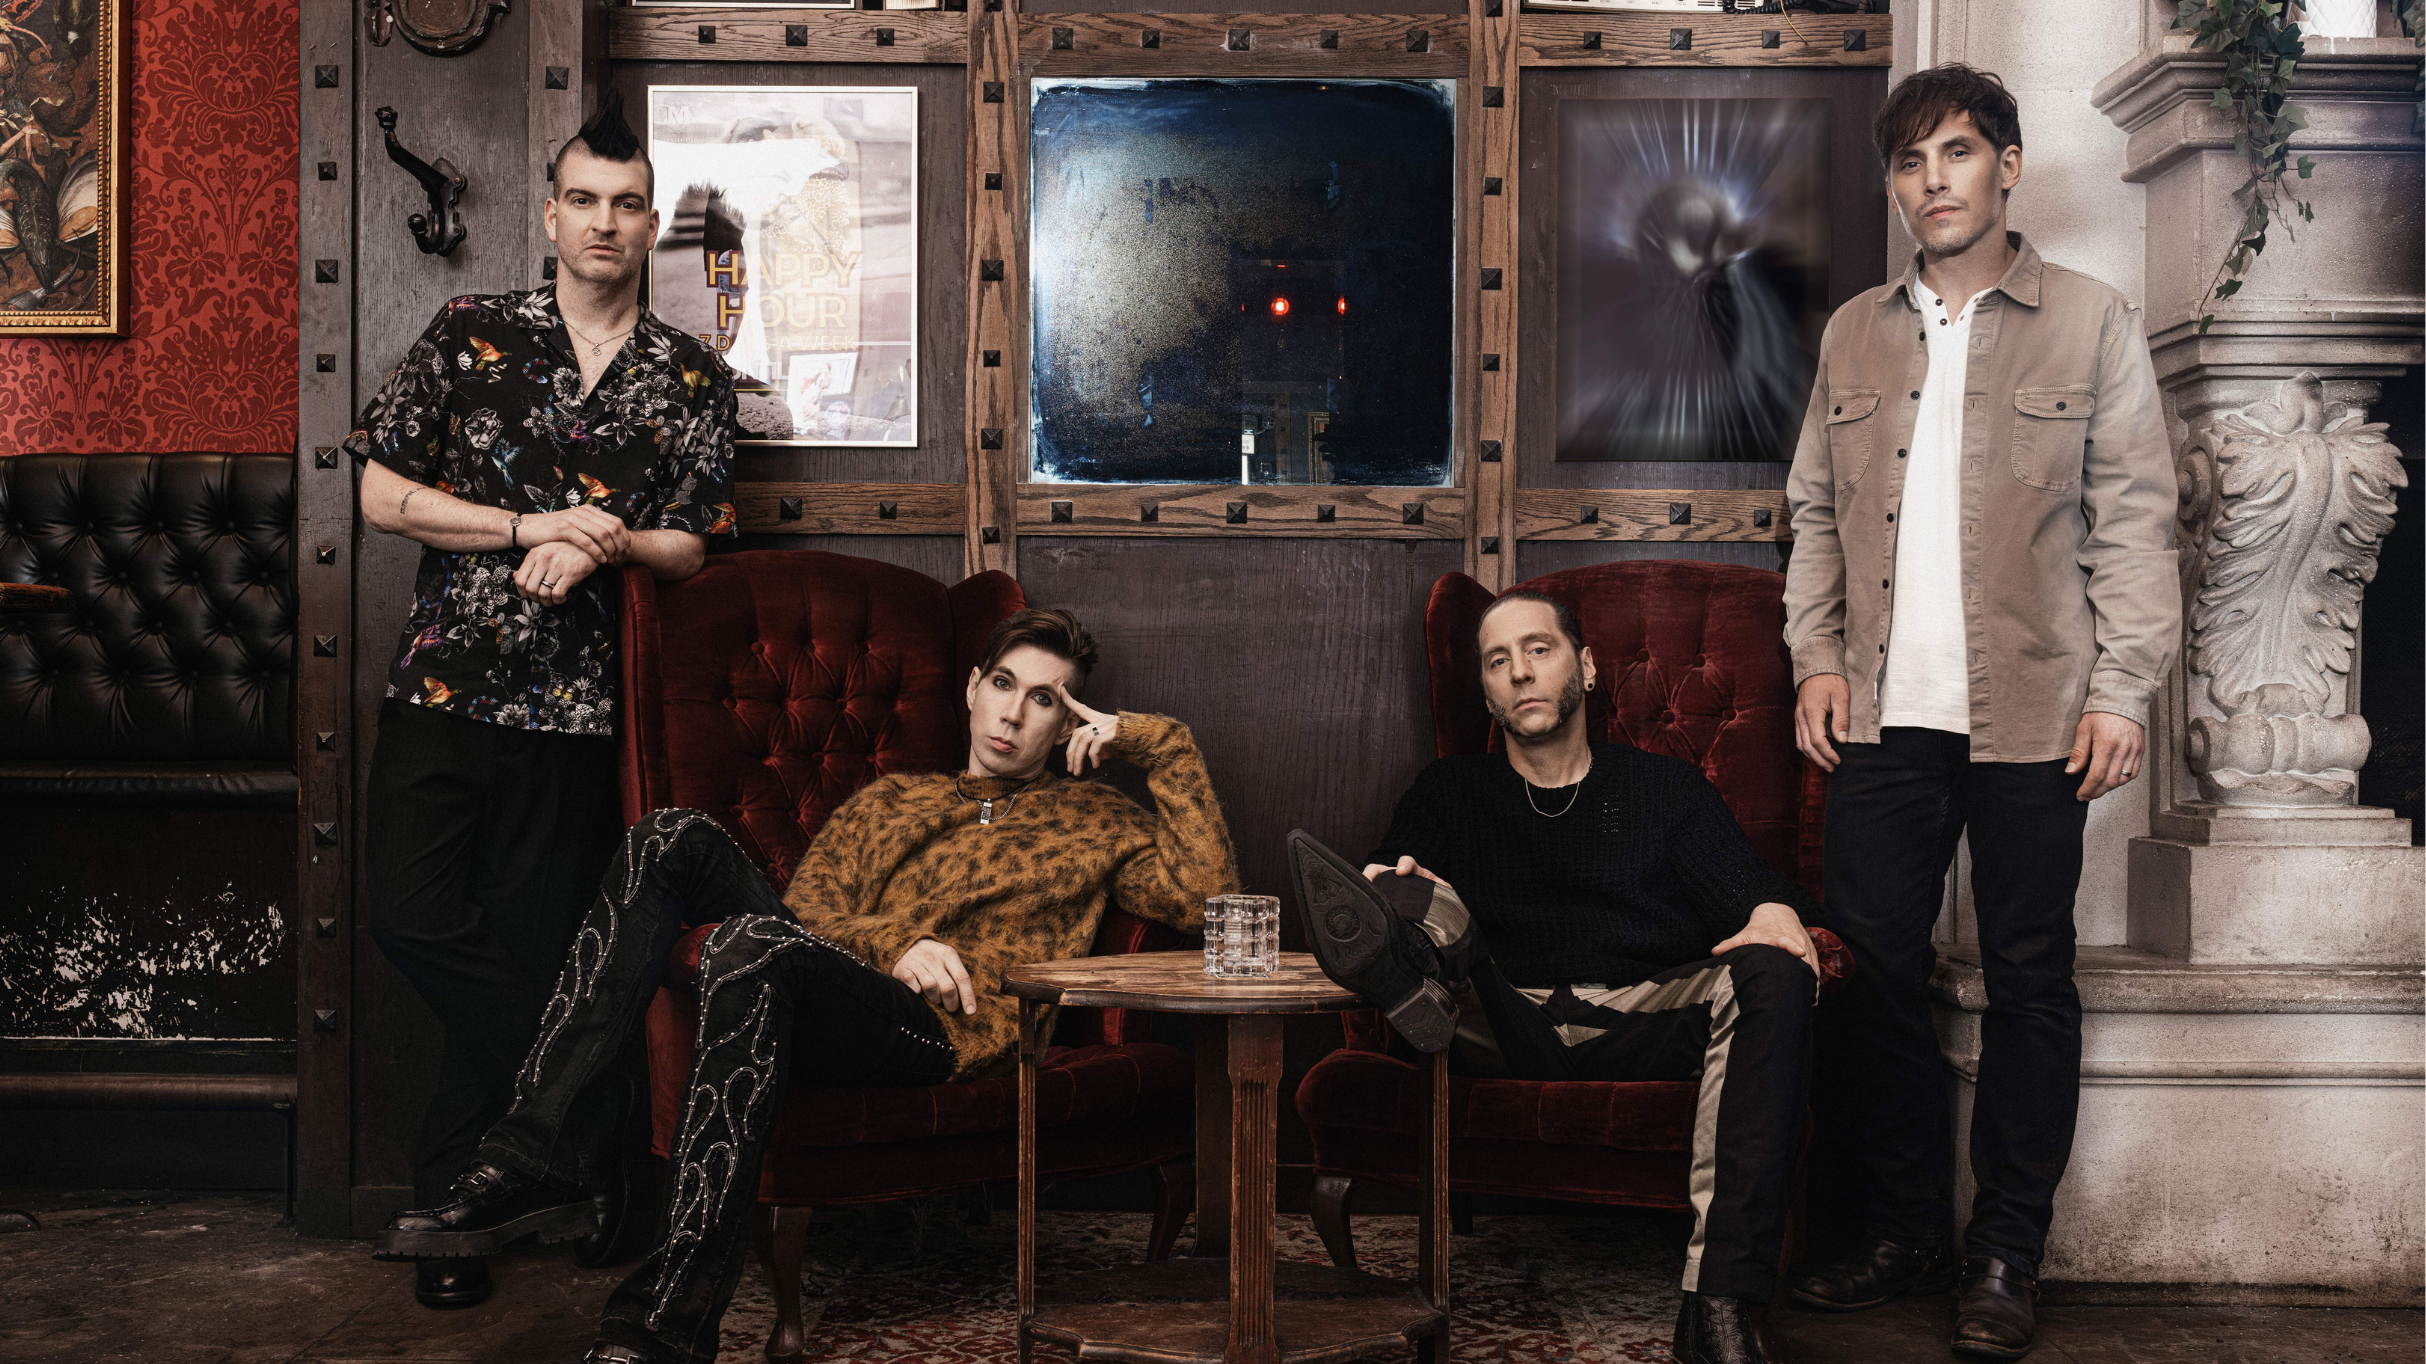 Marianas Trench - The Force of Nature Tour presale password for real tickets in Phoenix